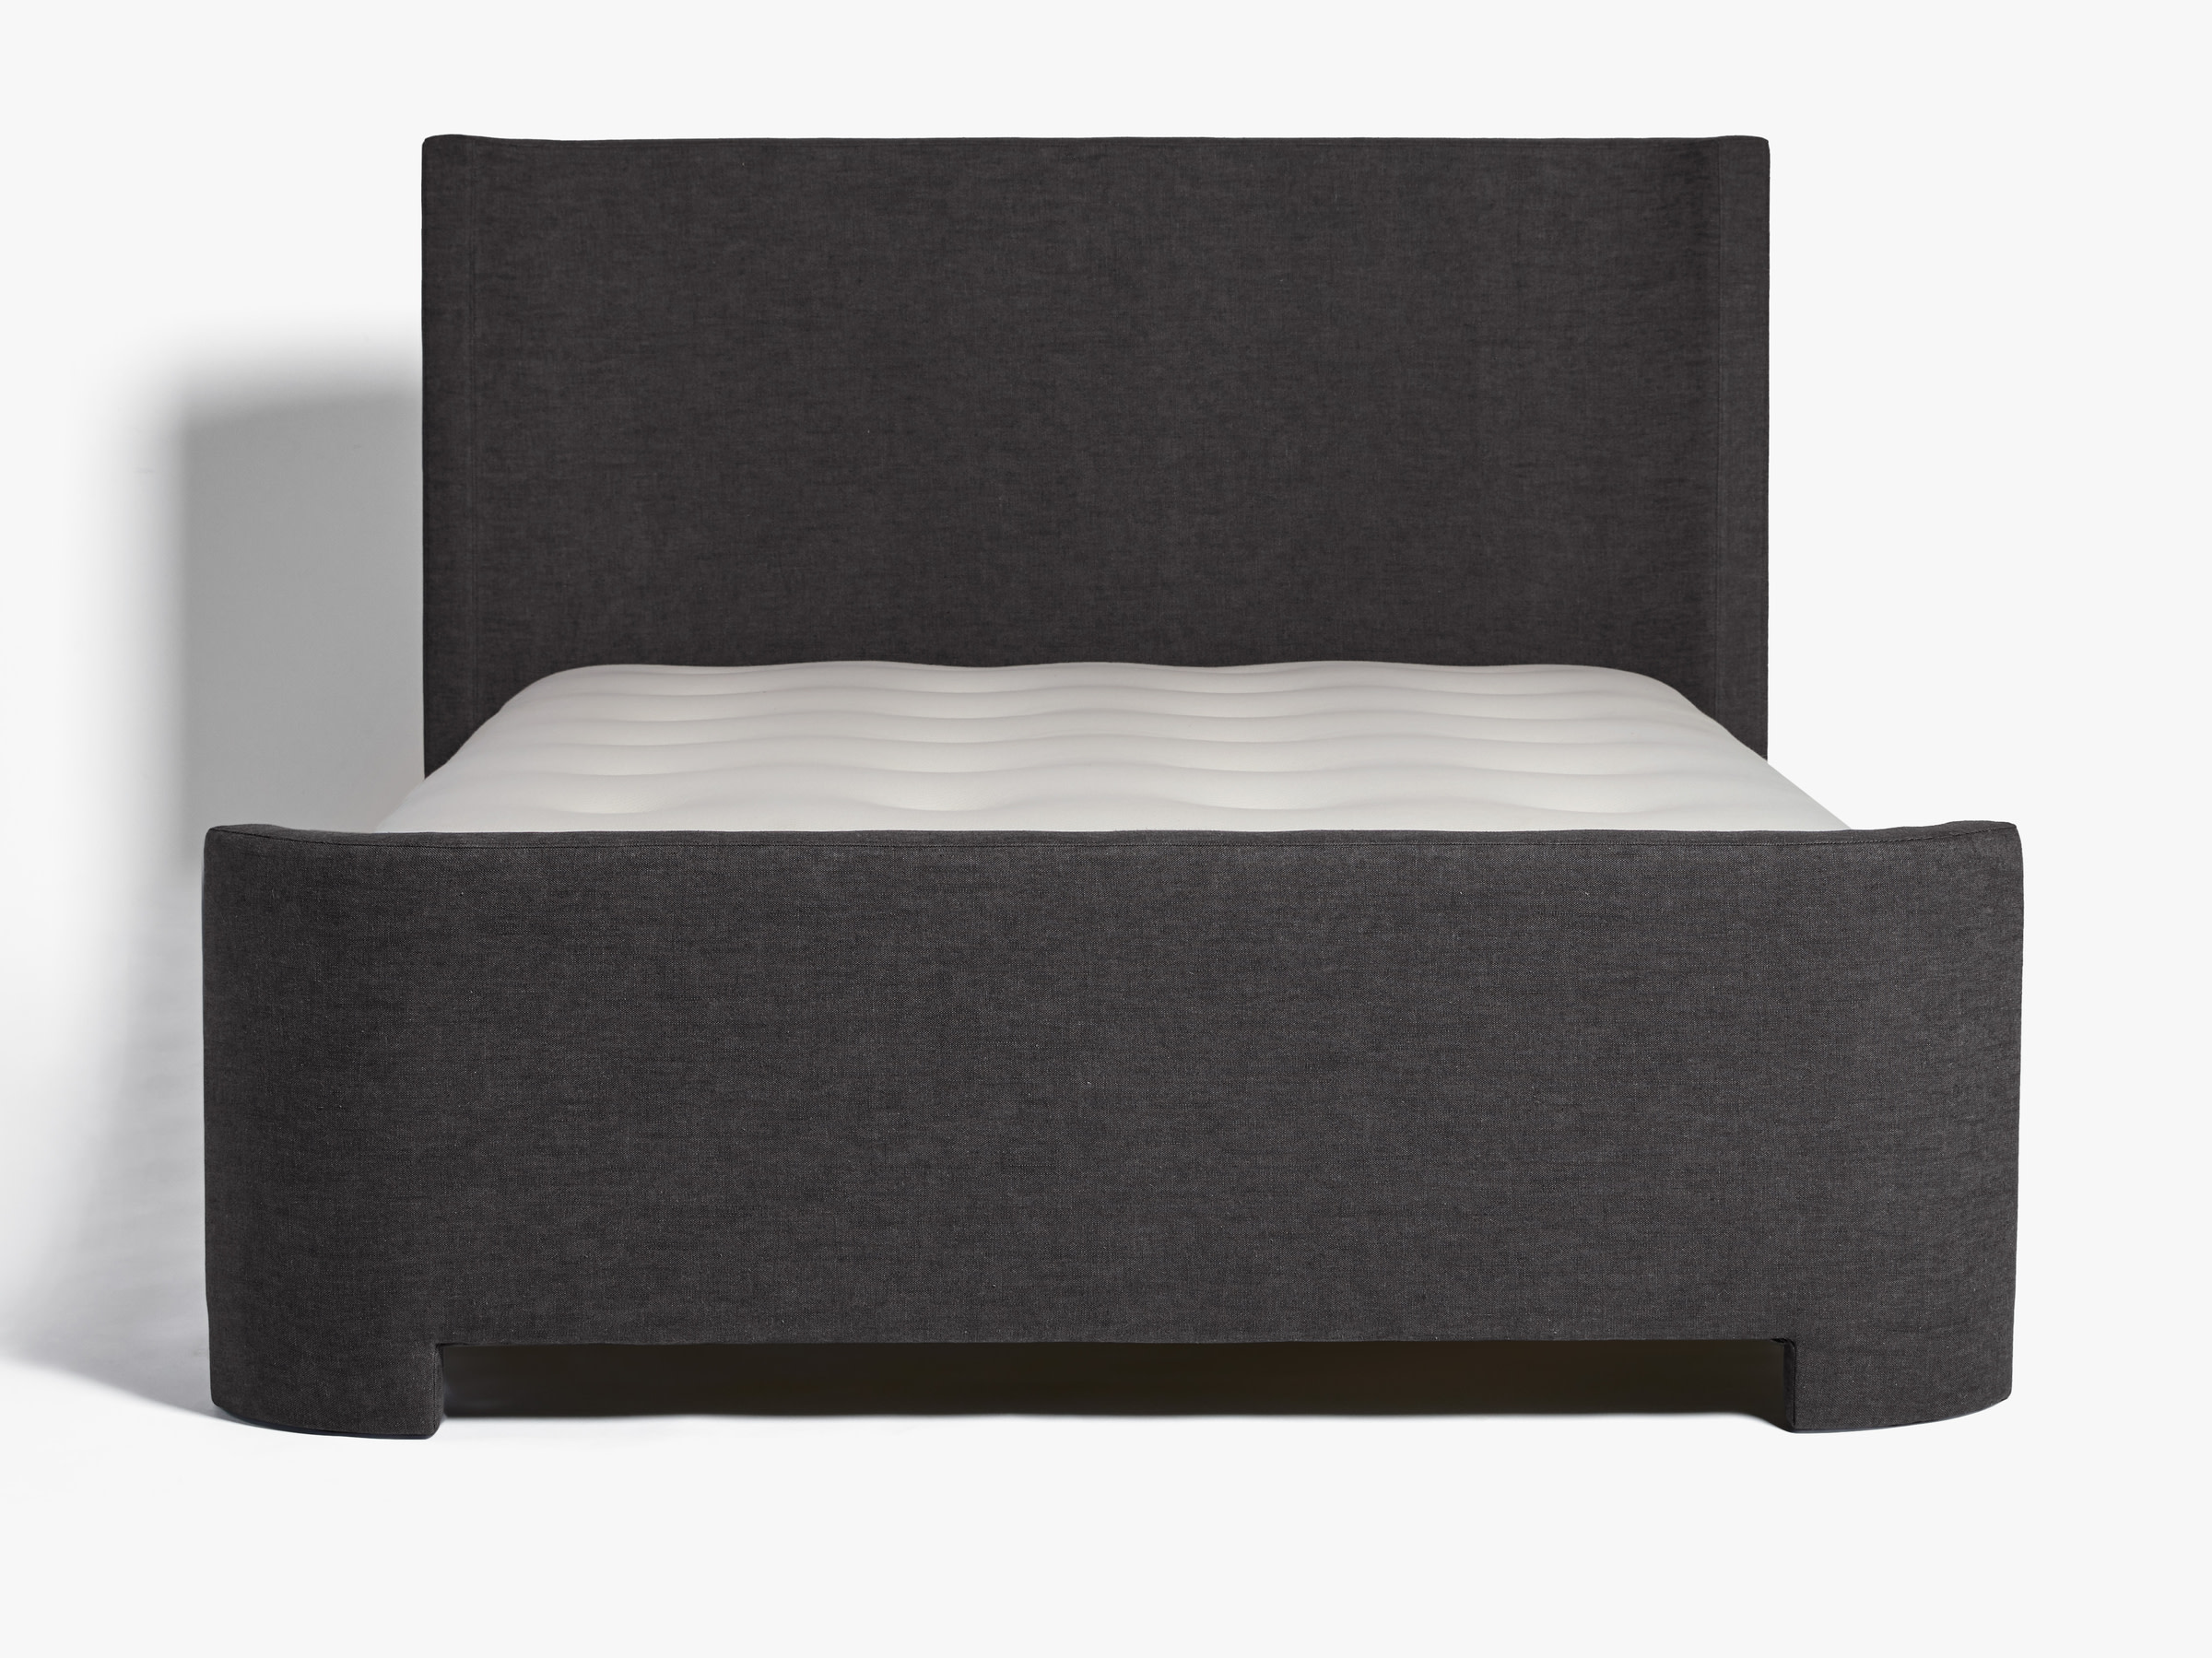 Charcoal Linen Cotton Blend Canyon Bed Frame With Footboard